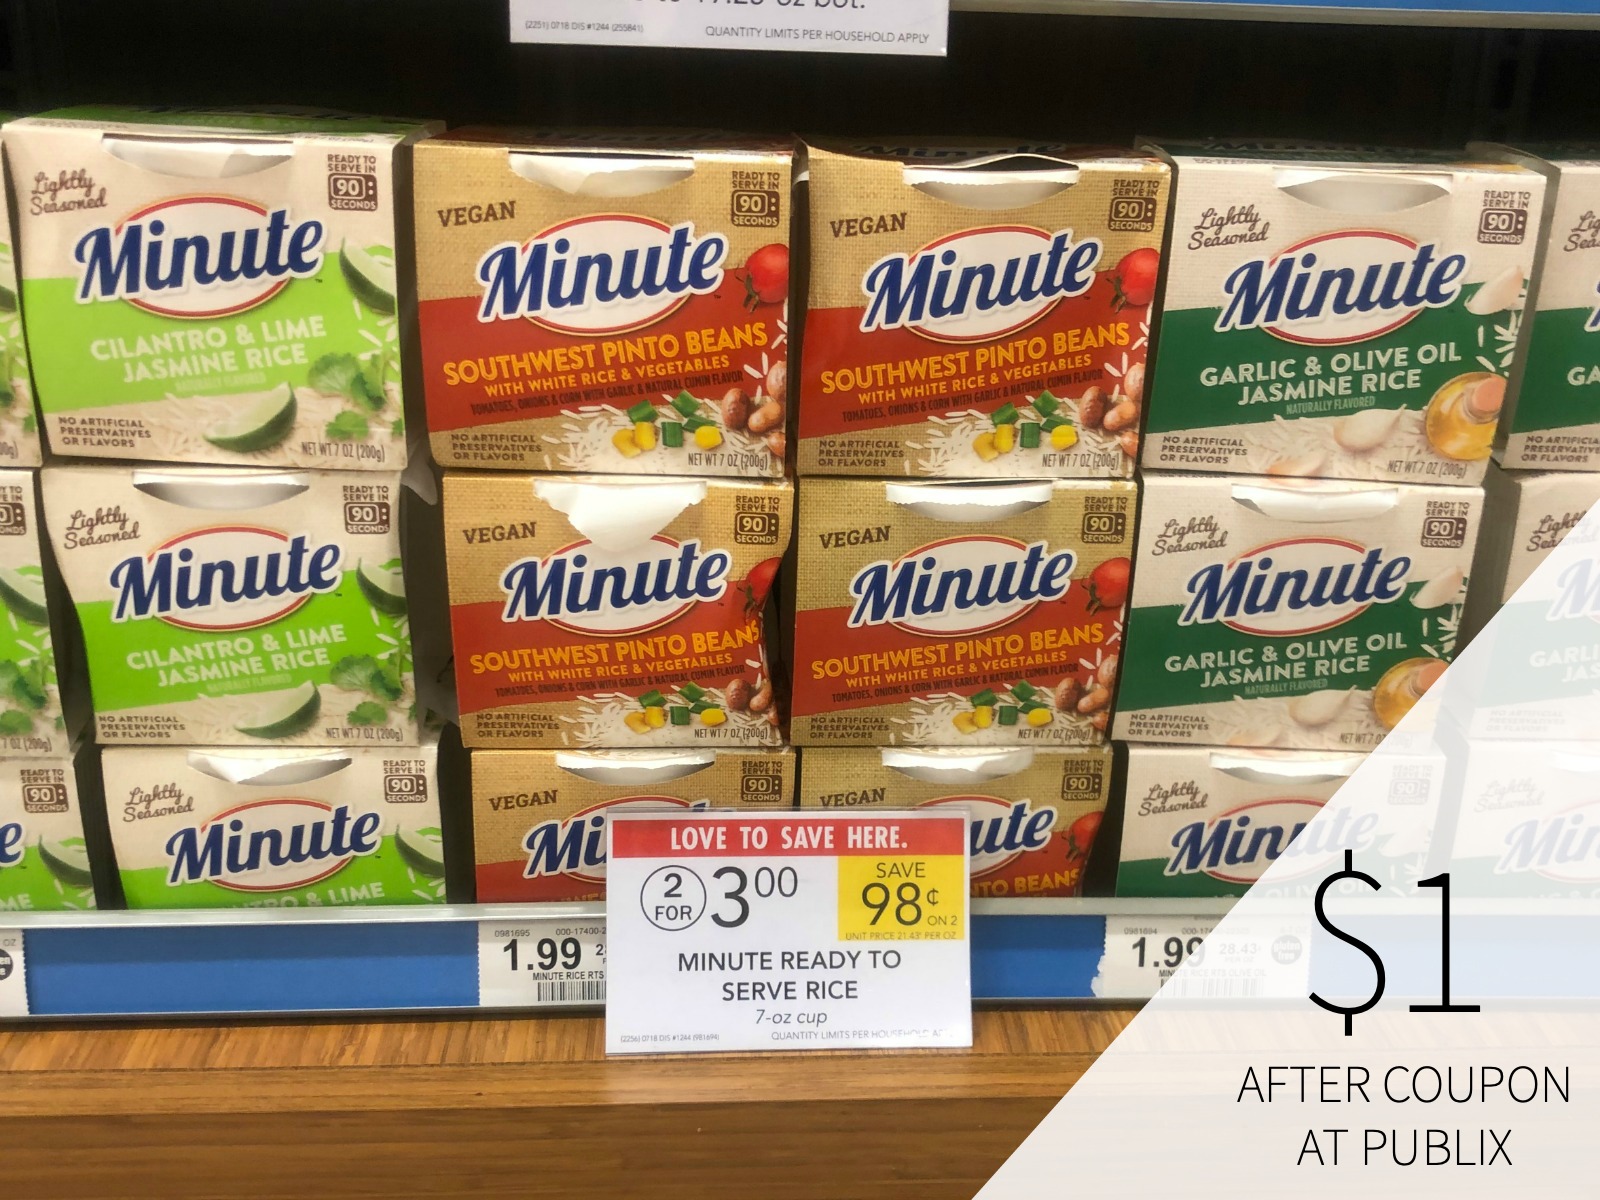 Super Deal On Minute Ready To Serve At Publix + Reminder About My $250 Publix Gift Card Giveaway on I Heart Publix